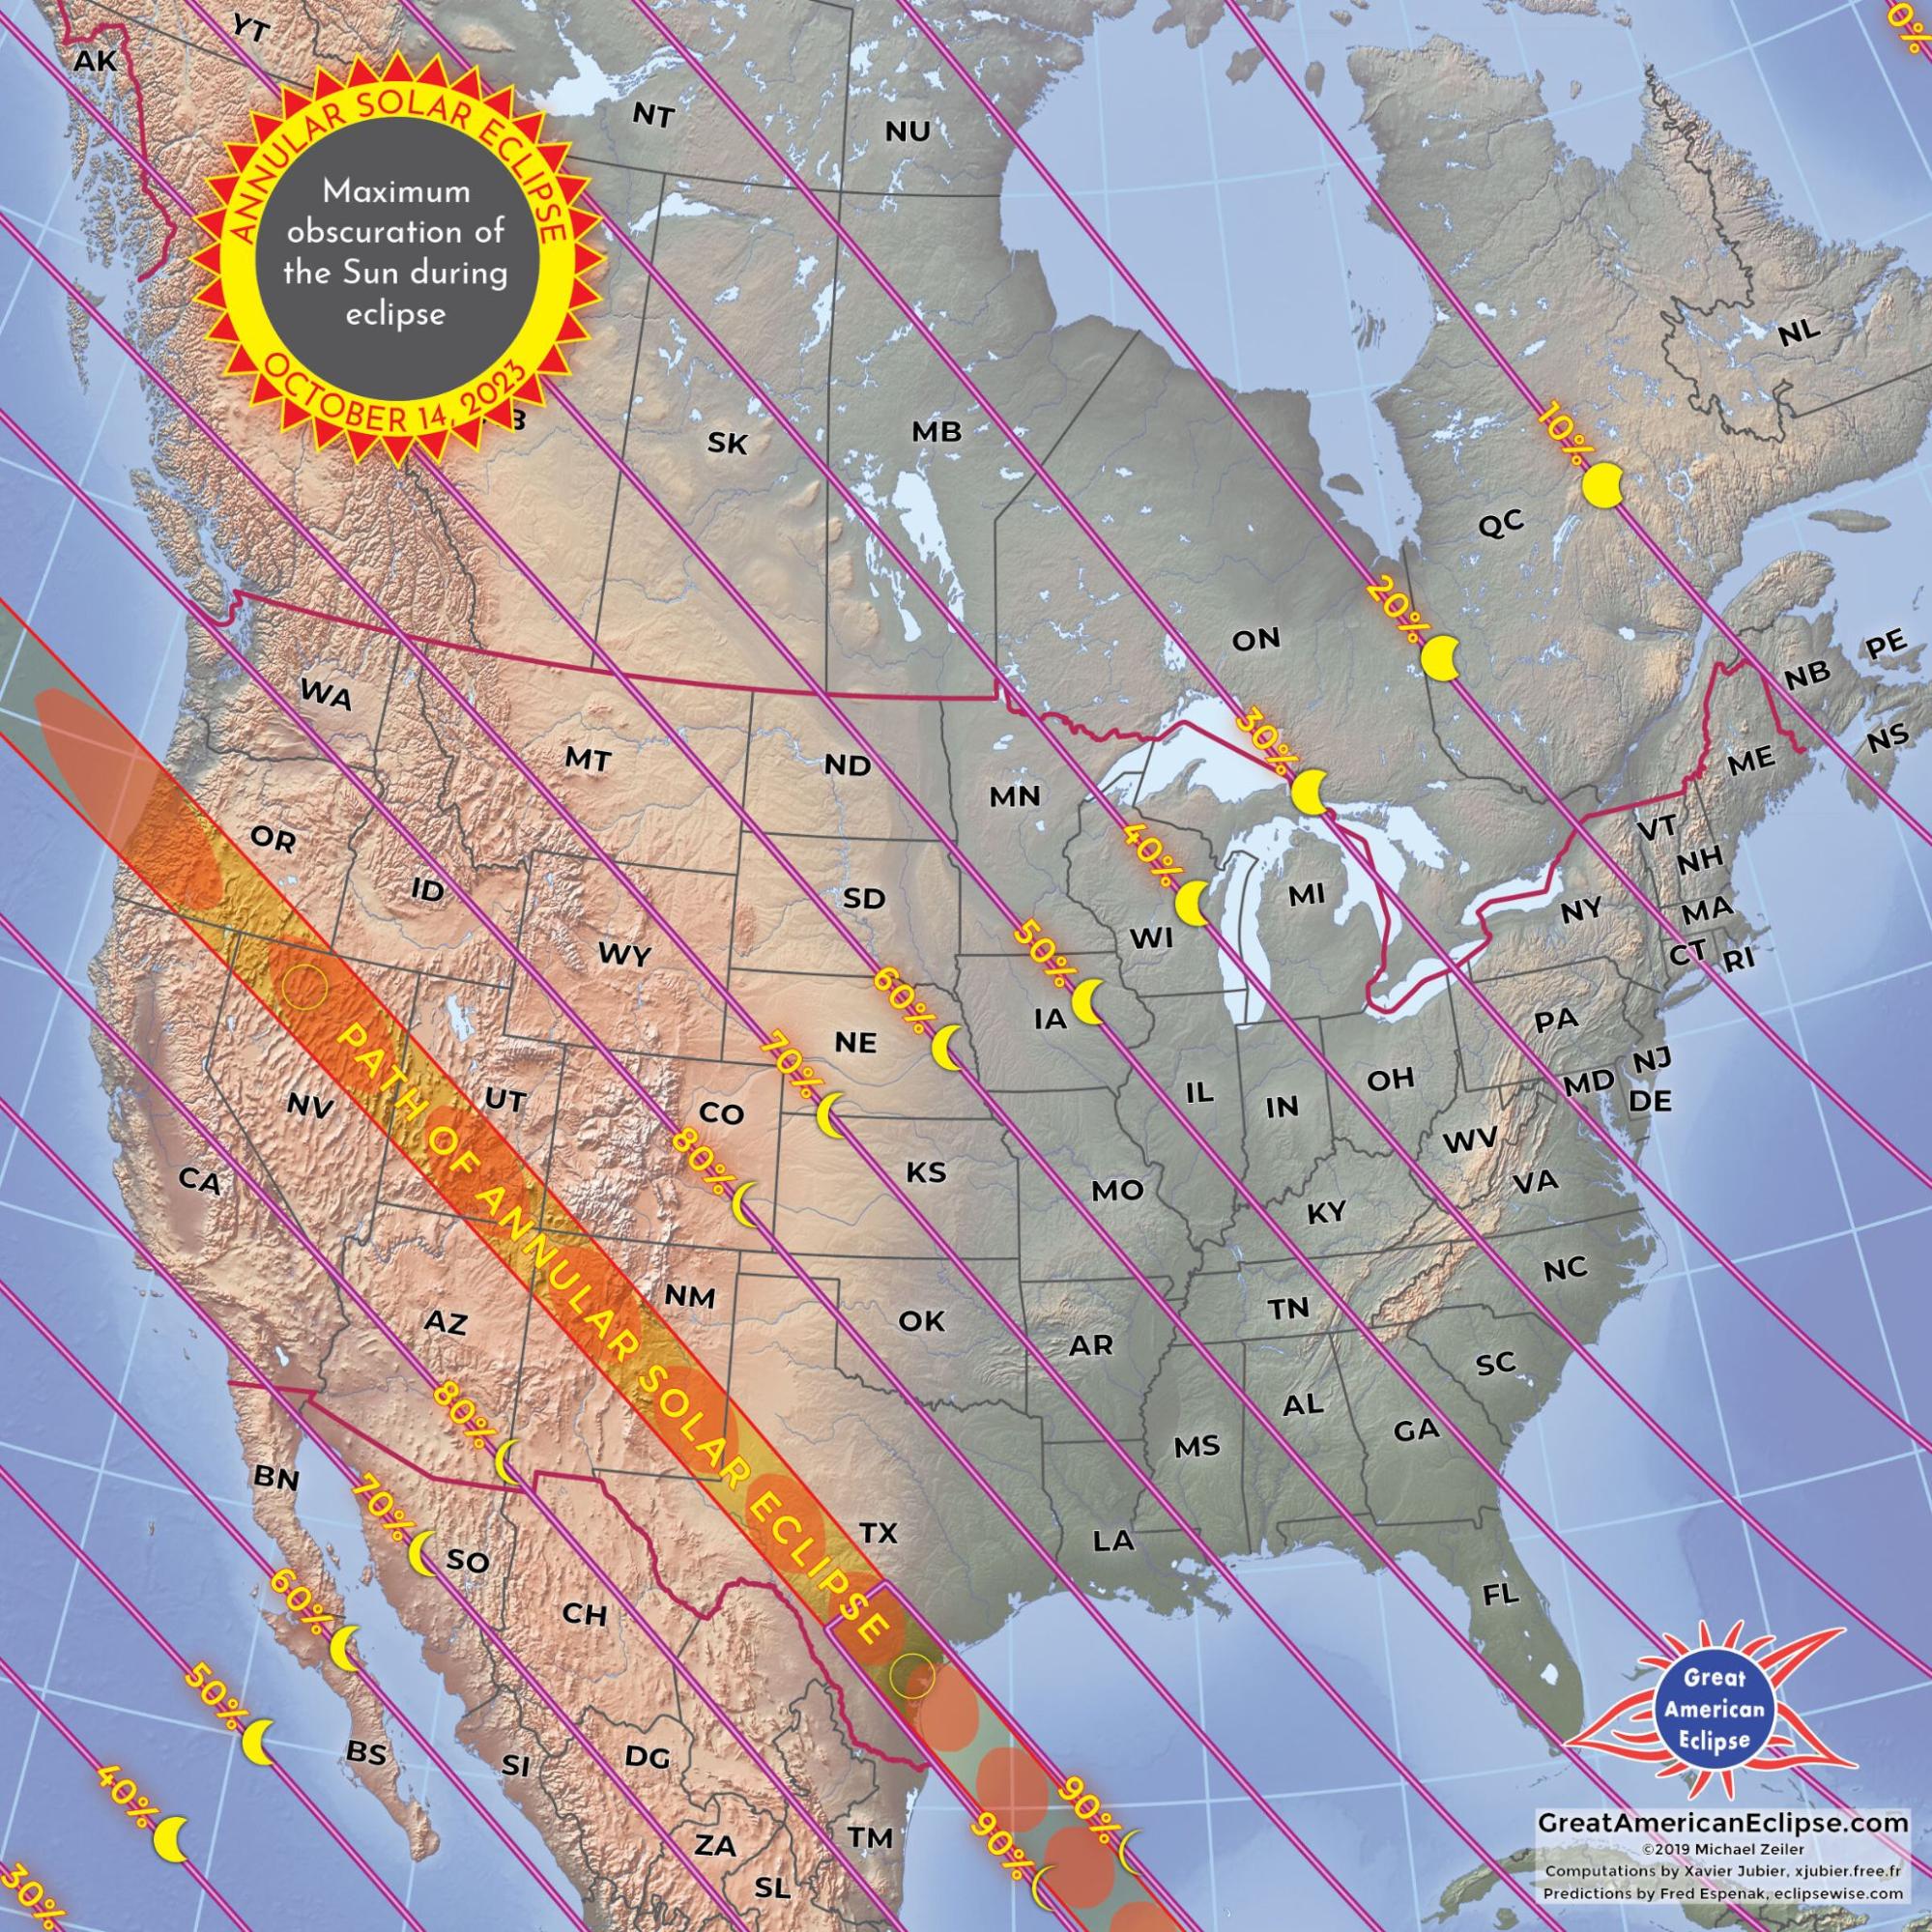 The path of the annular solar eclipse over North America